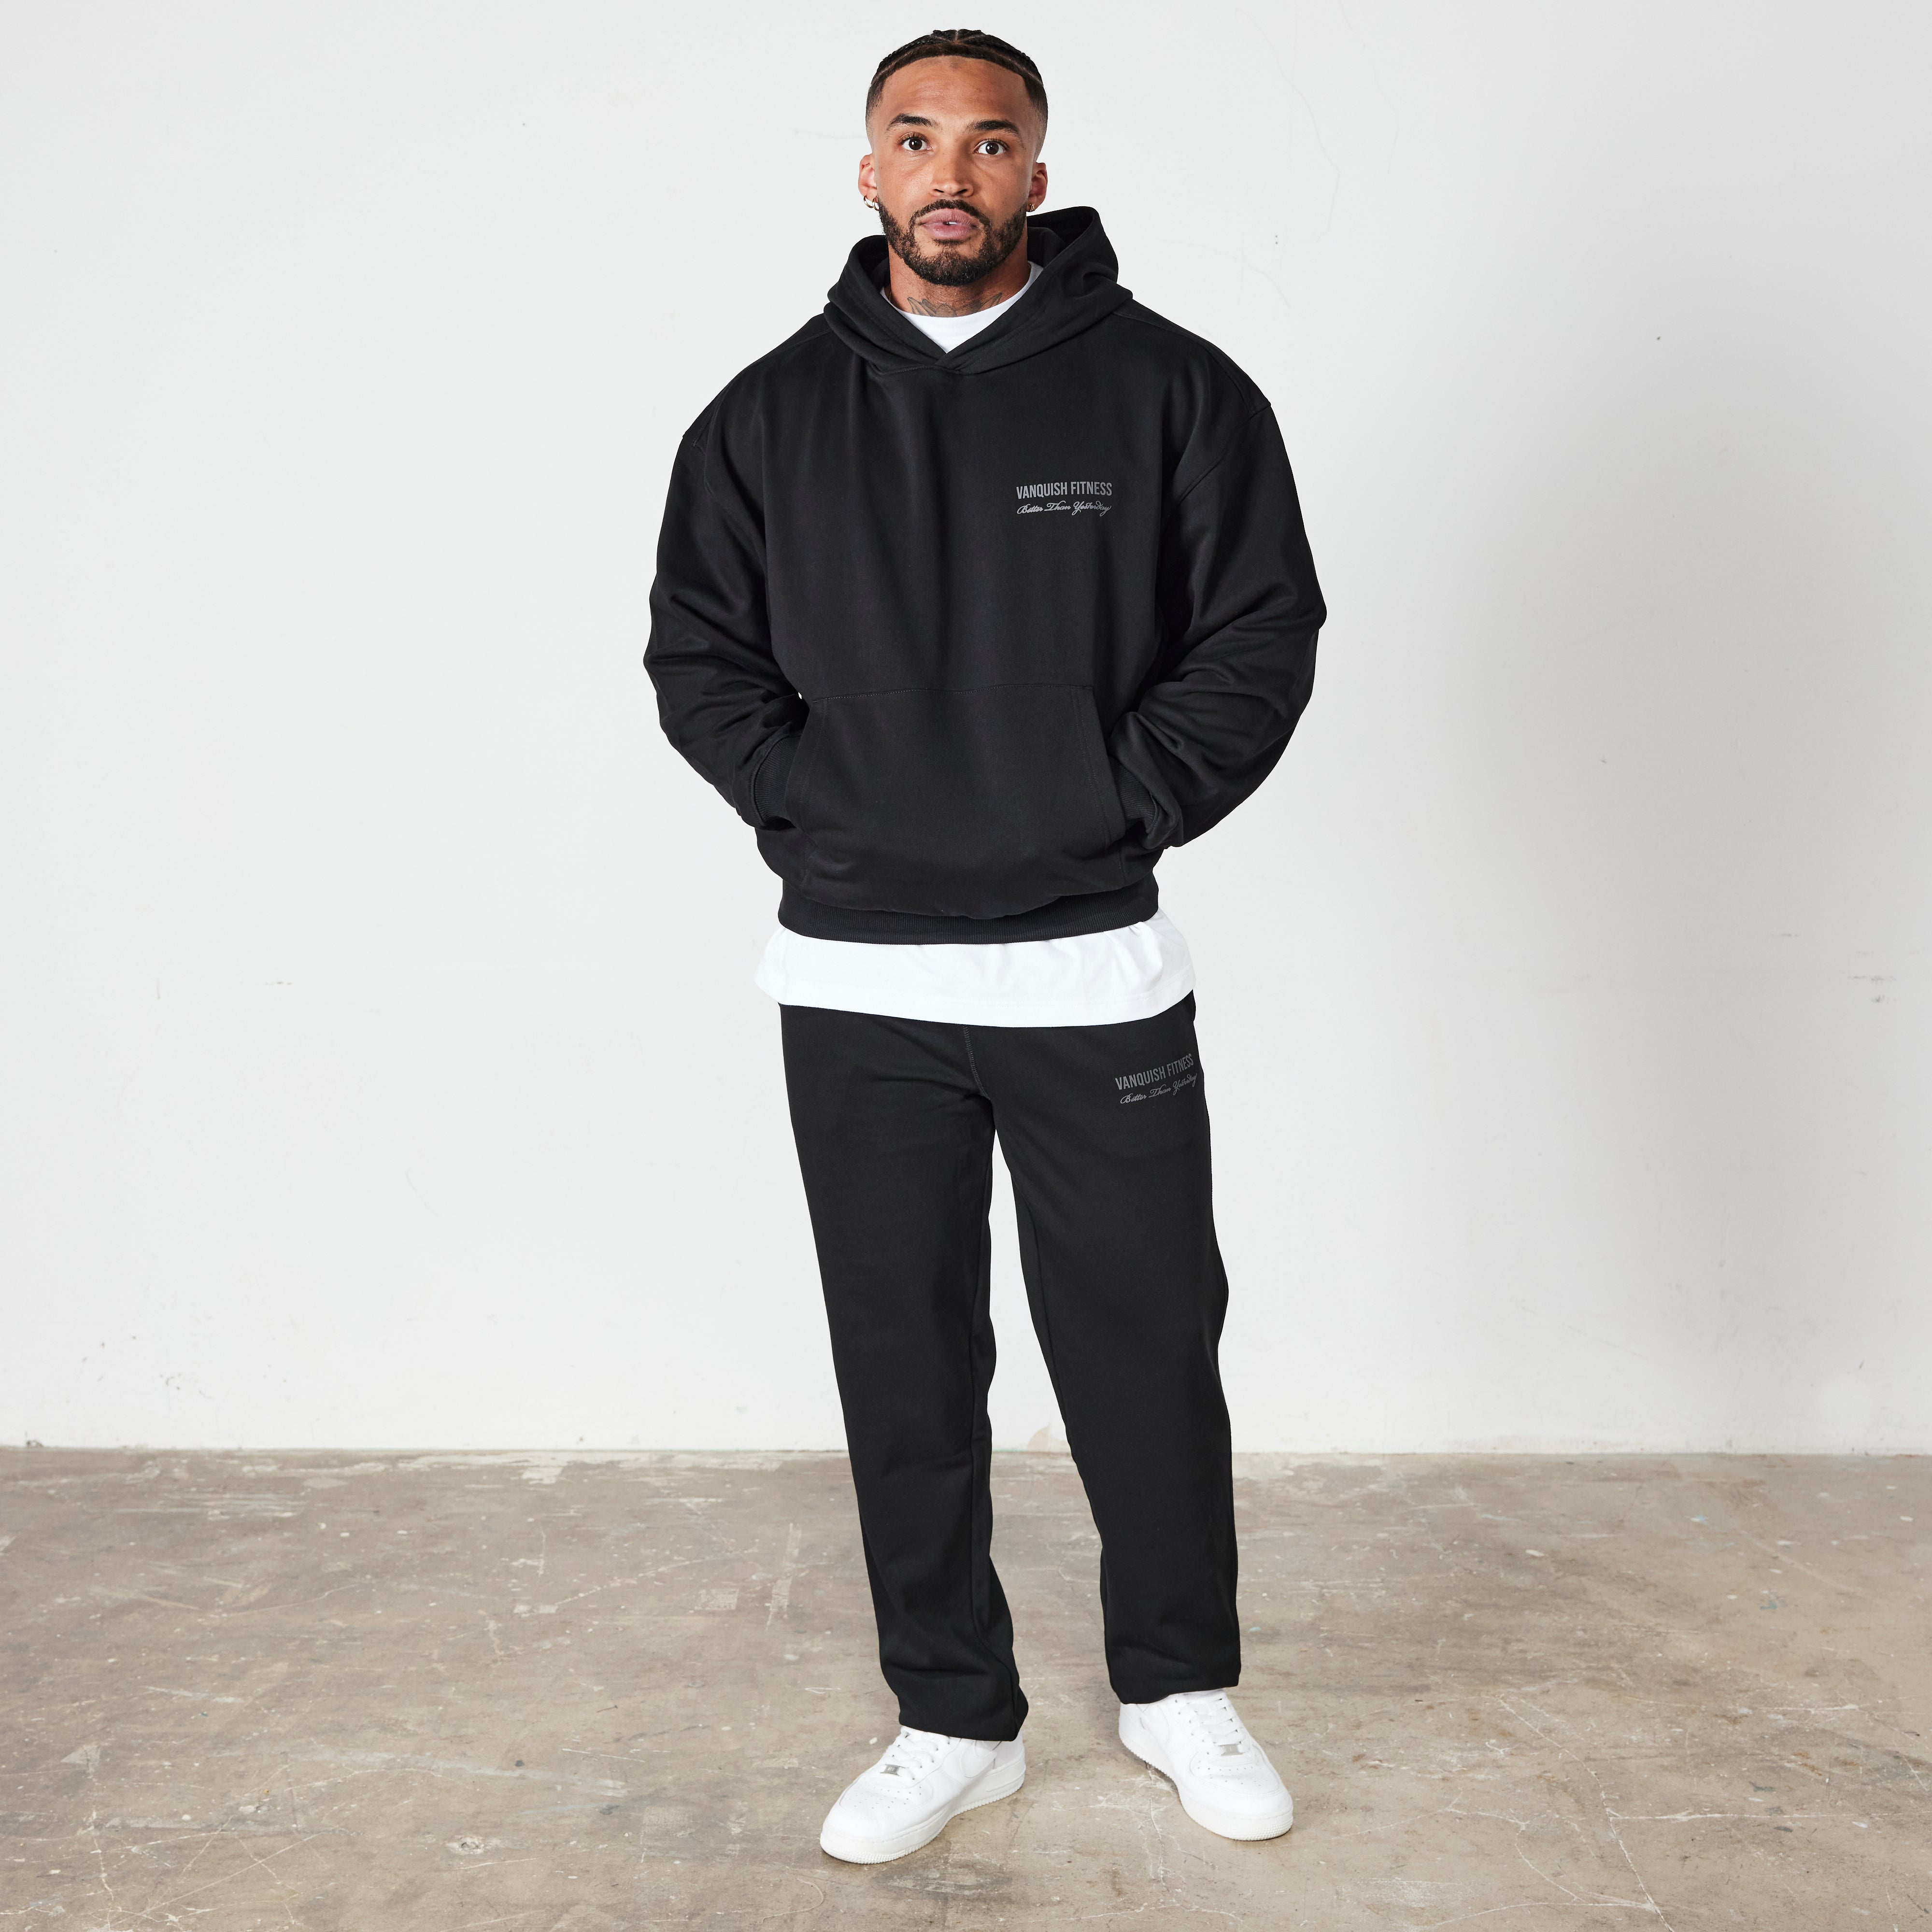 Vanquish Black Signature Collection Oversized Pullover Hoodie